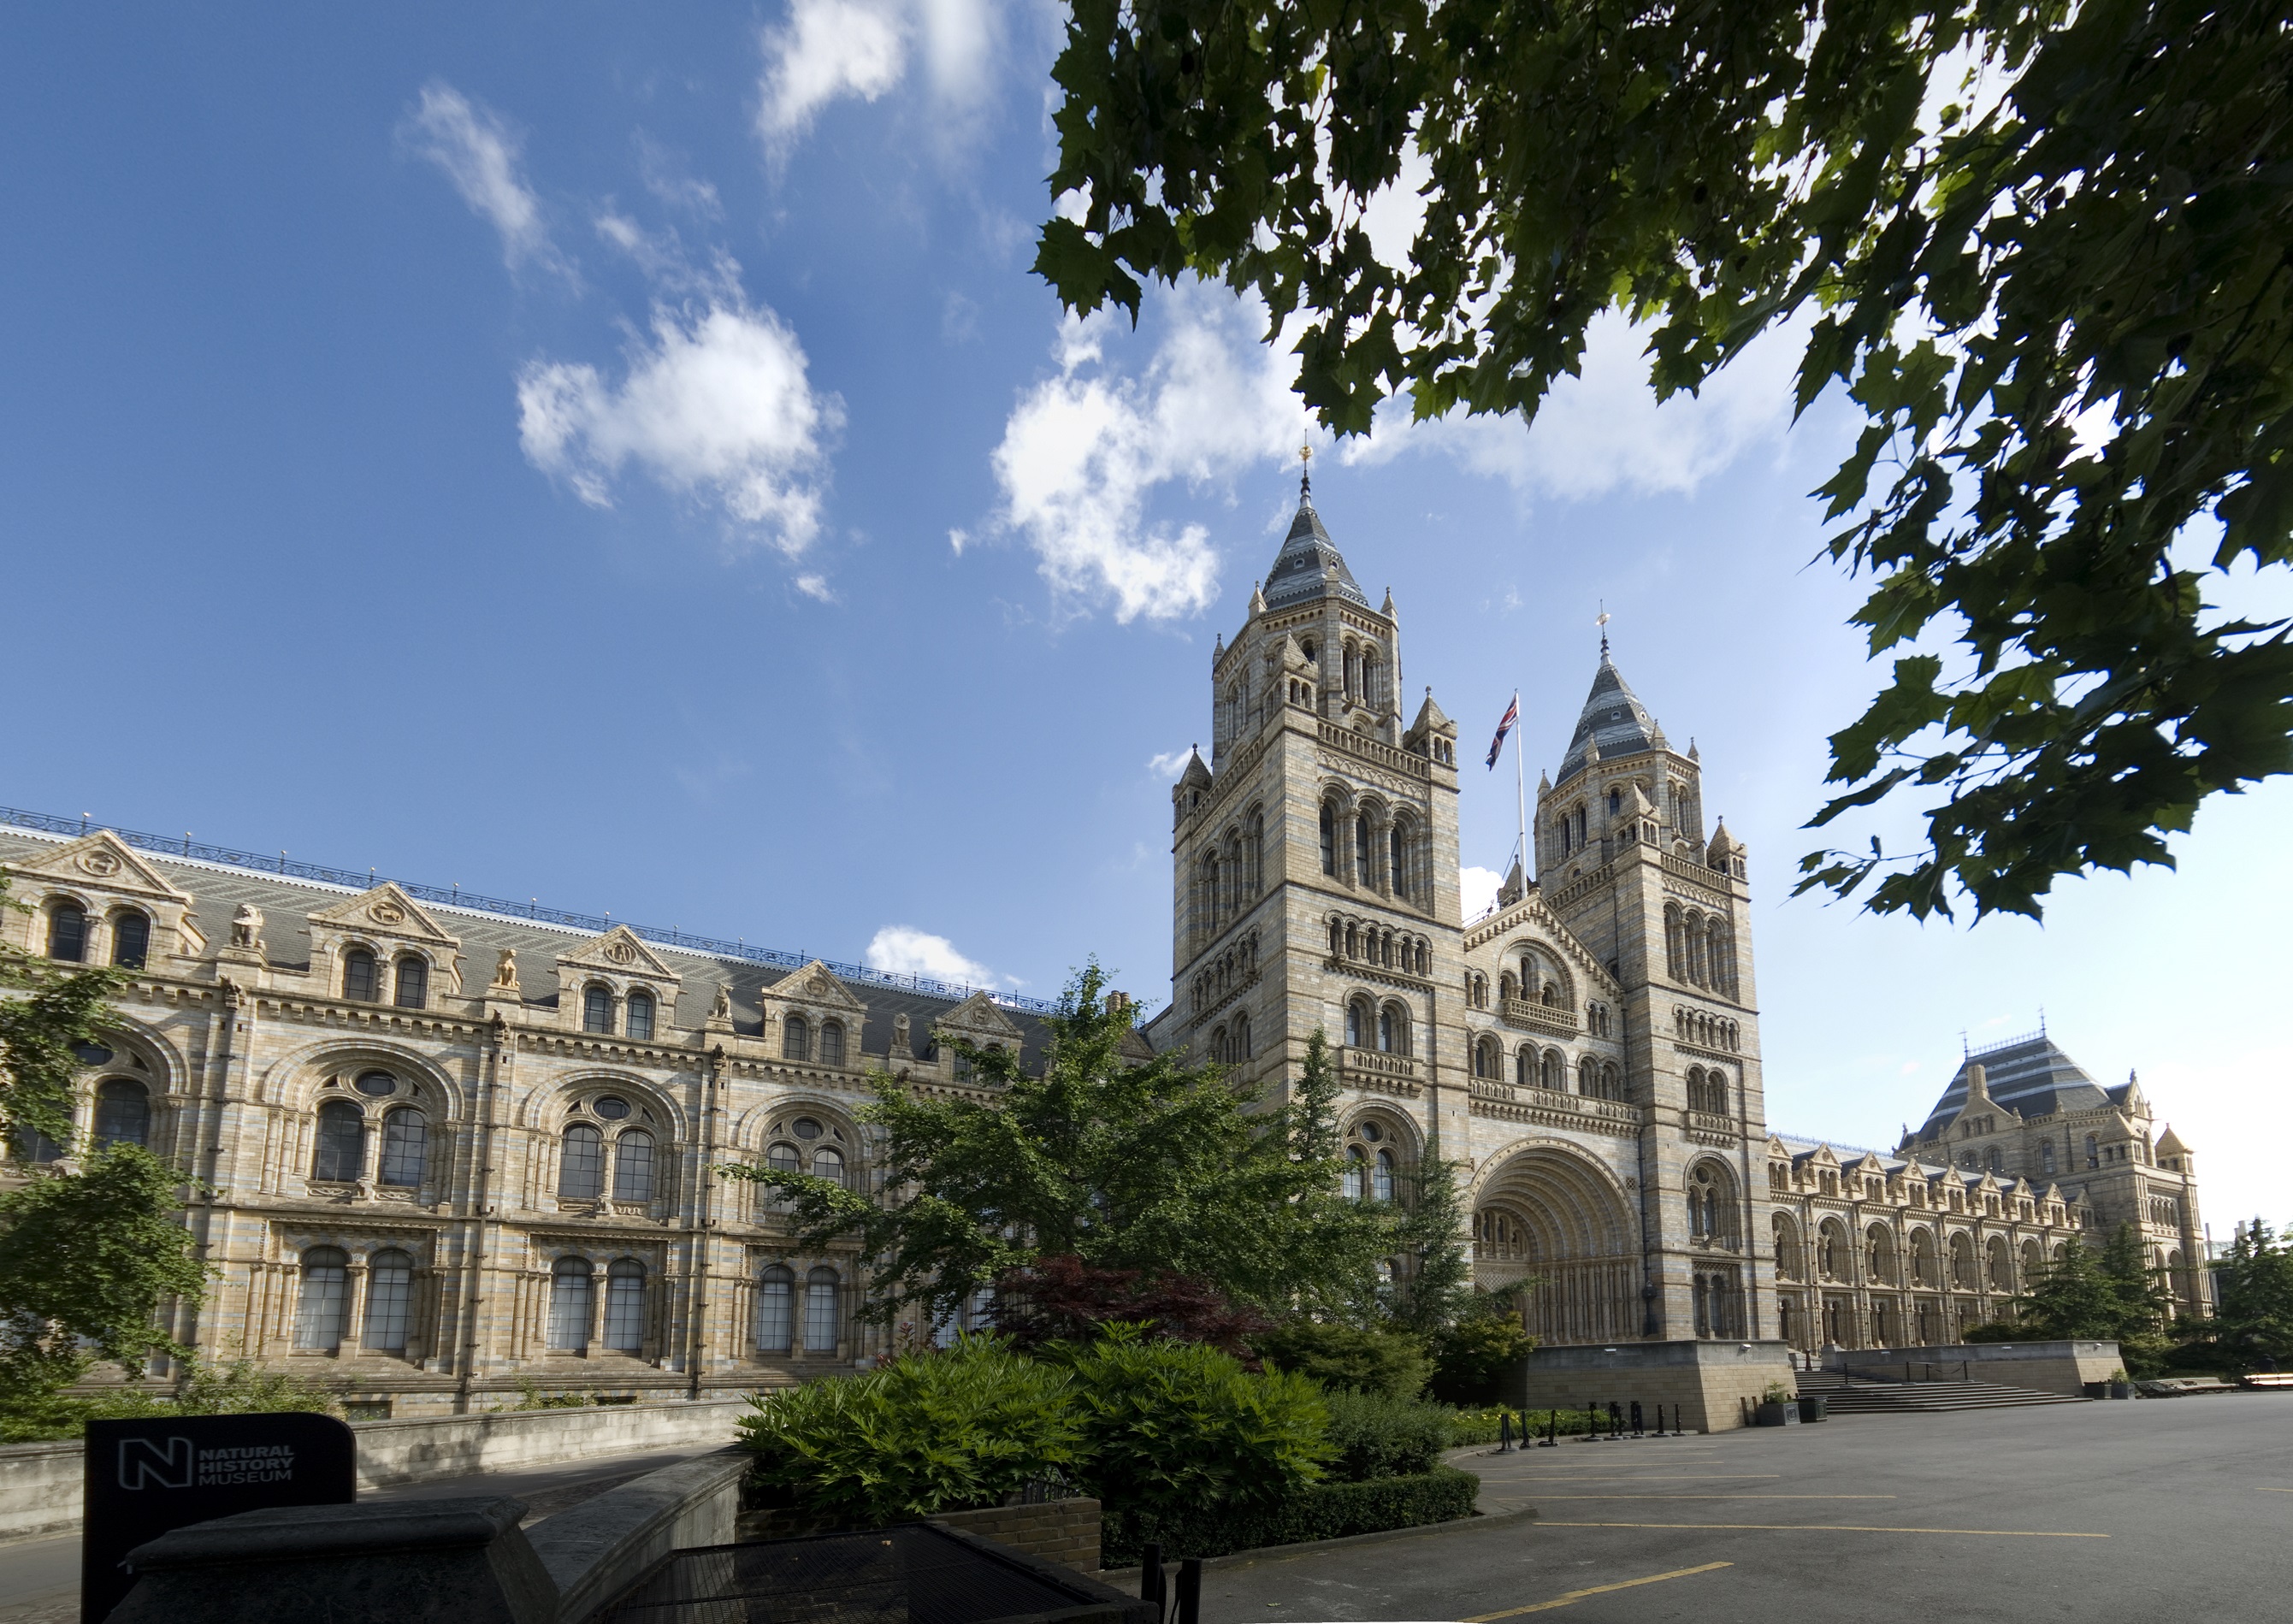 The Natural History Museum shortlisted for the 10th anniversary edition of Art Fund Museum of the Year 2023,